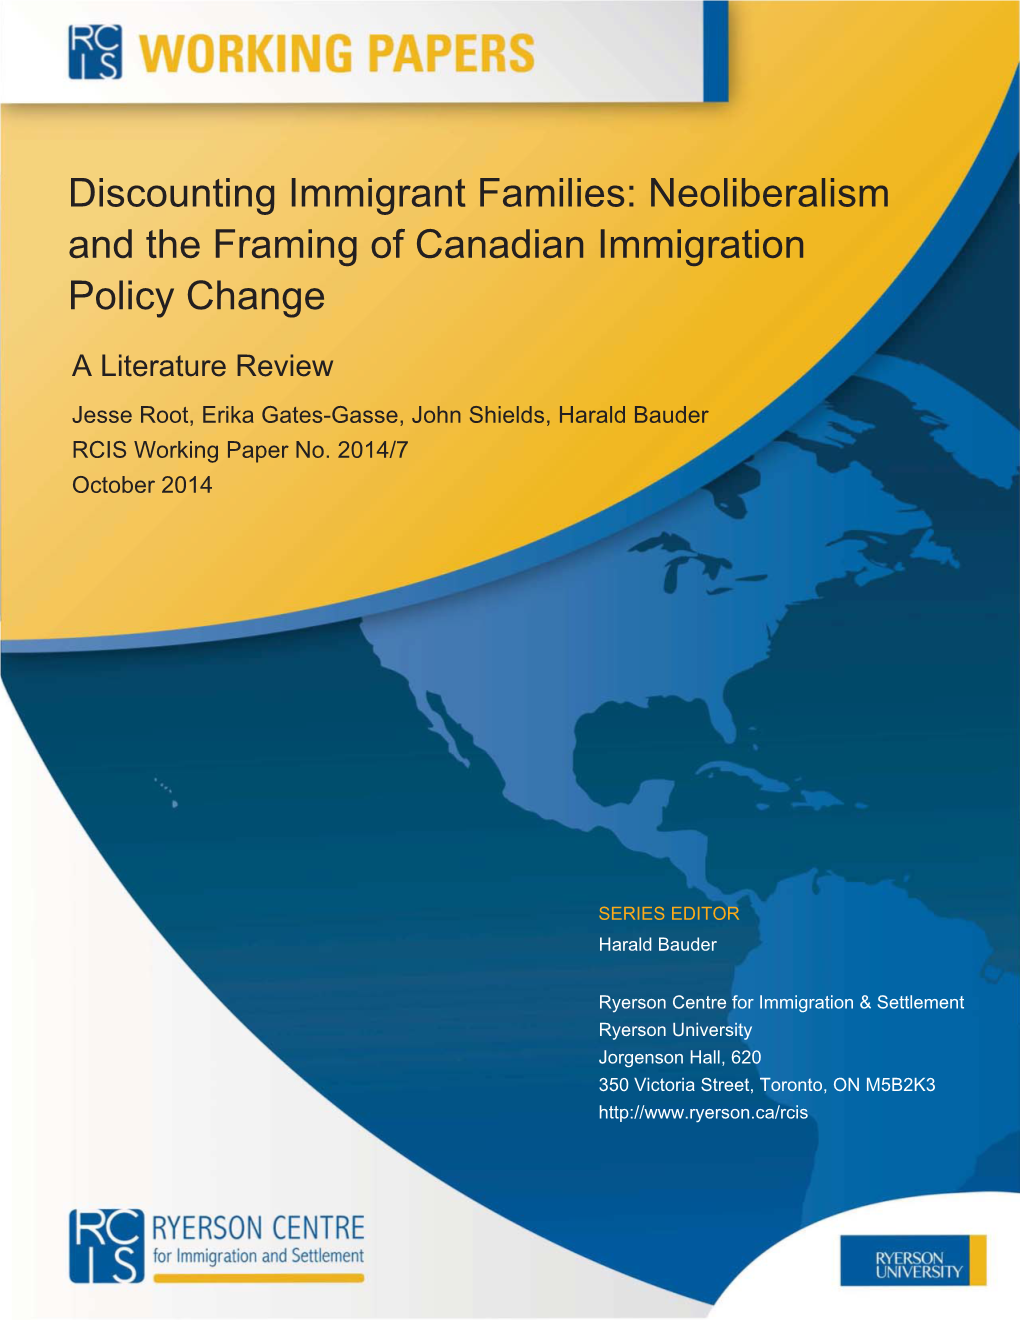 Neoliberalism and the Framing of Canadian Immigration Policy Change